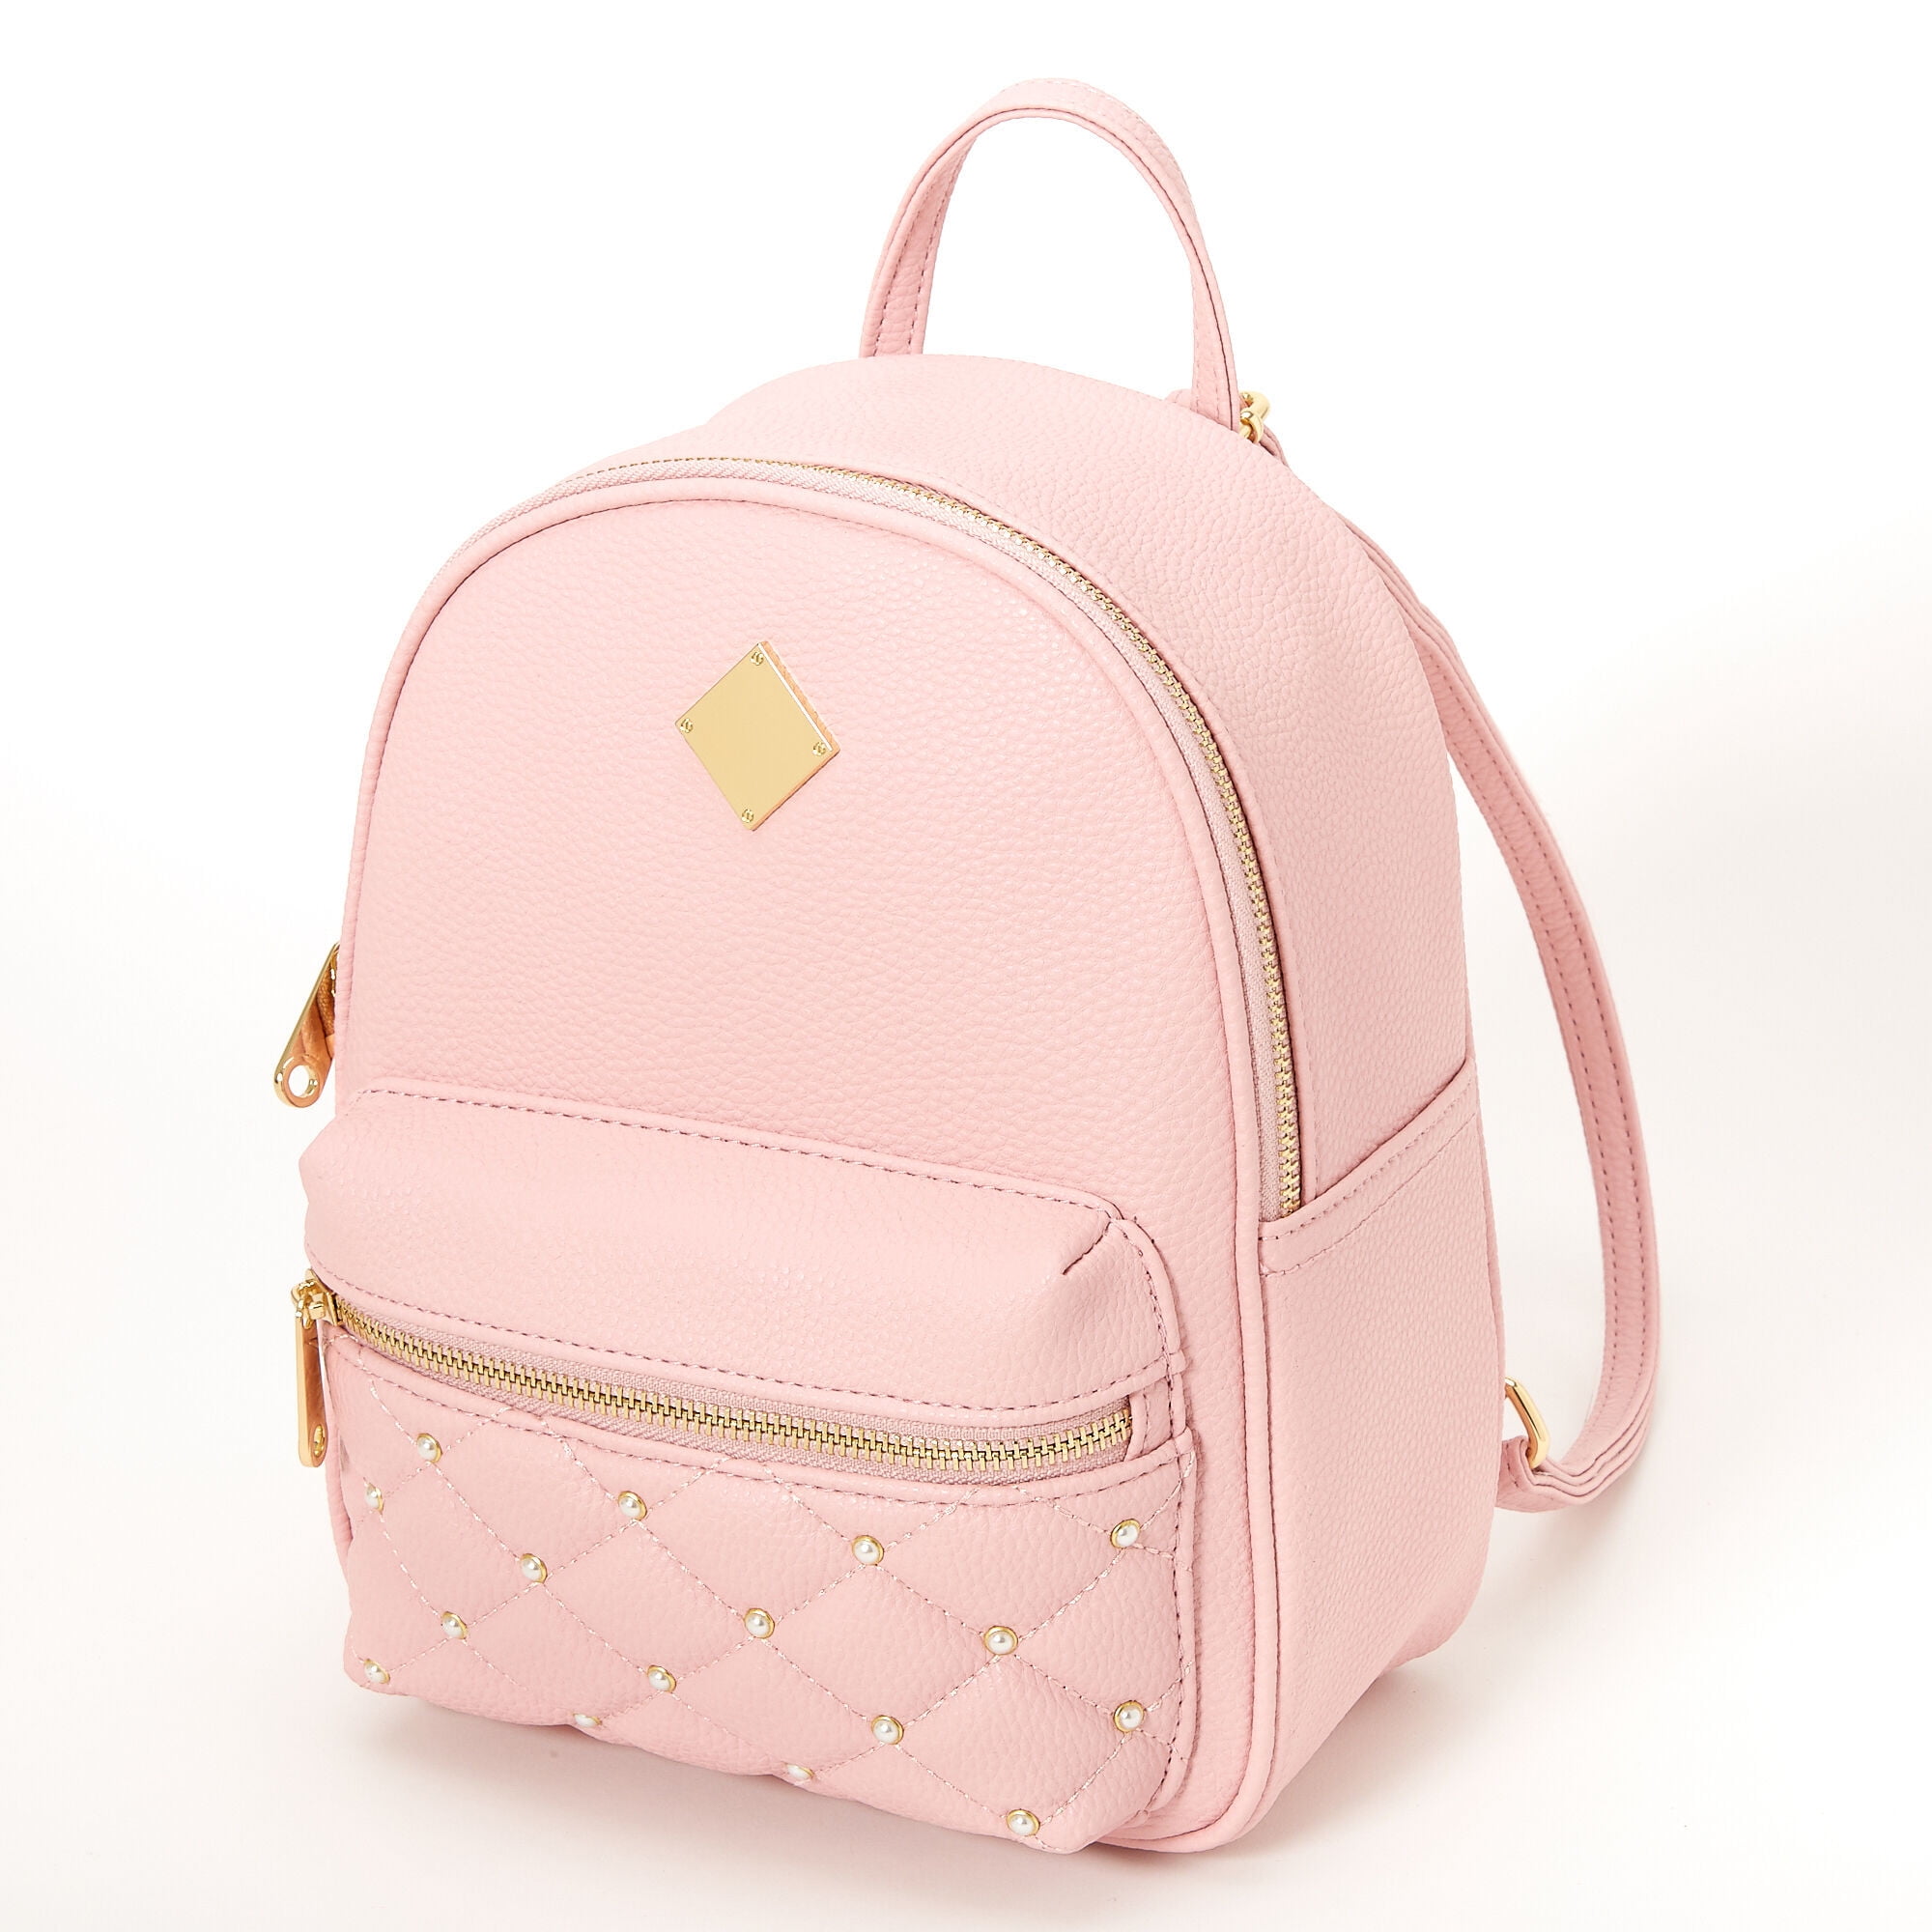 Claire s Small Backpack Girls Purse Cute Functional Fashion Accessory for Kids Little Girl Tweens and Teens Pink Quilted Pearl 8x5 5x10 5 0cb37b68 84da 420c 8c58 a9a1ad6a25e0.31f7bf0c999fe2d29e18568444aec646